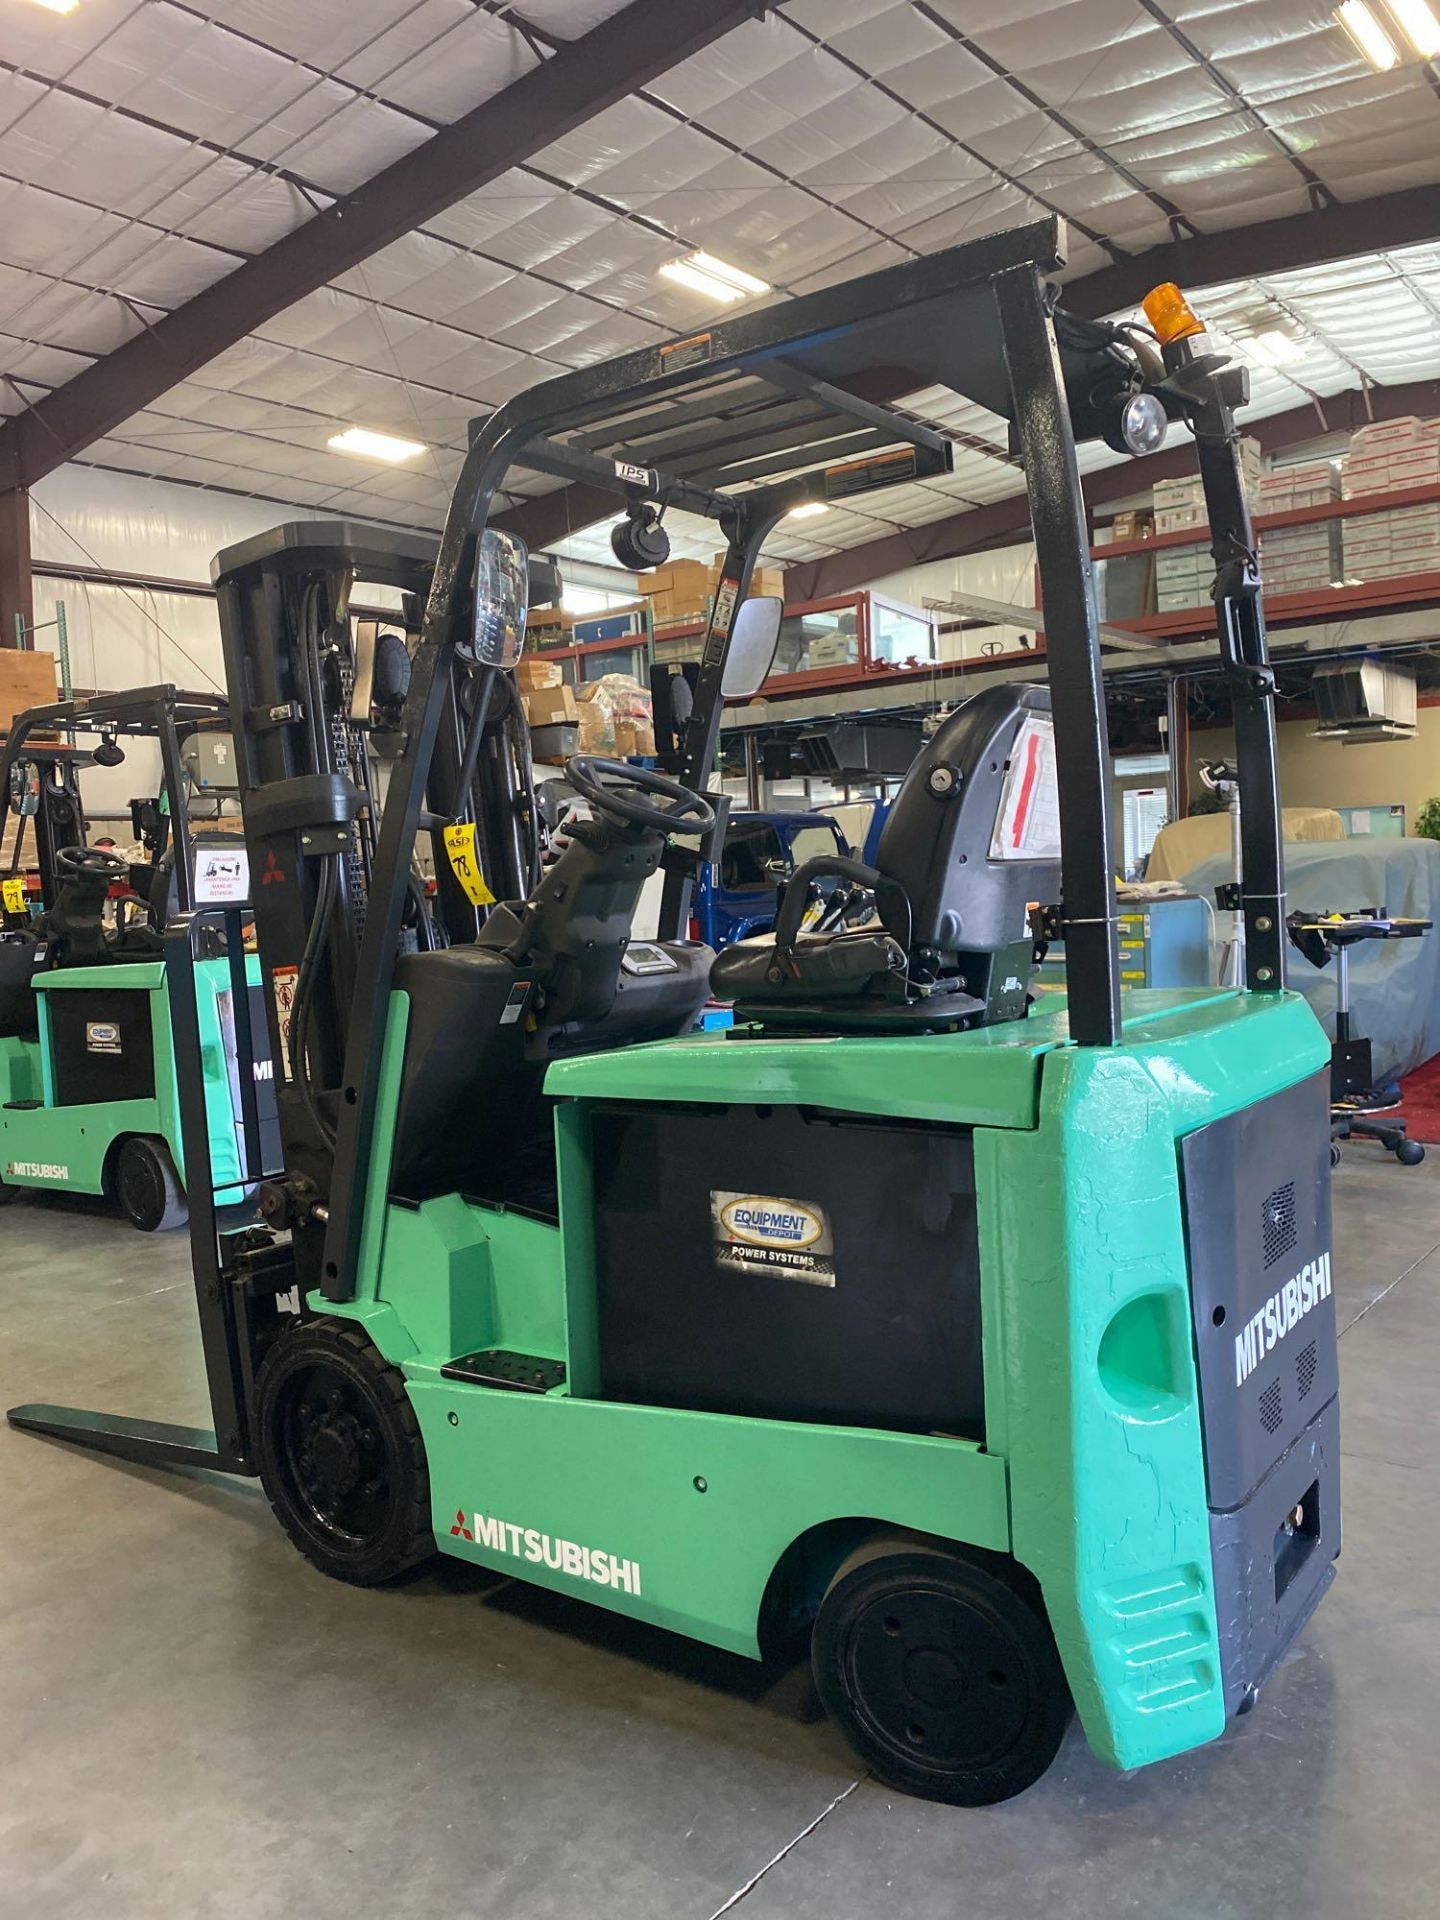 2016 MITSUBISHI FBC25N2 ELECTRIC FORKLIFT, APPROX. 4,500 LB CAPACITY - Image 3 of 7